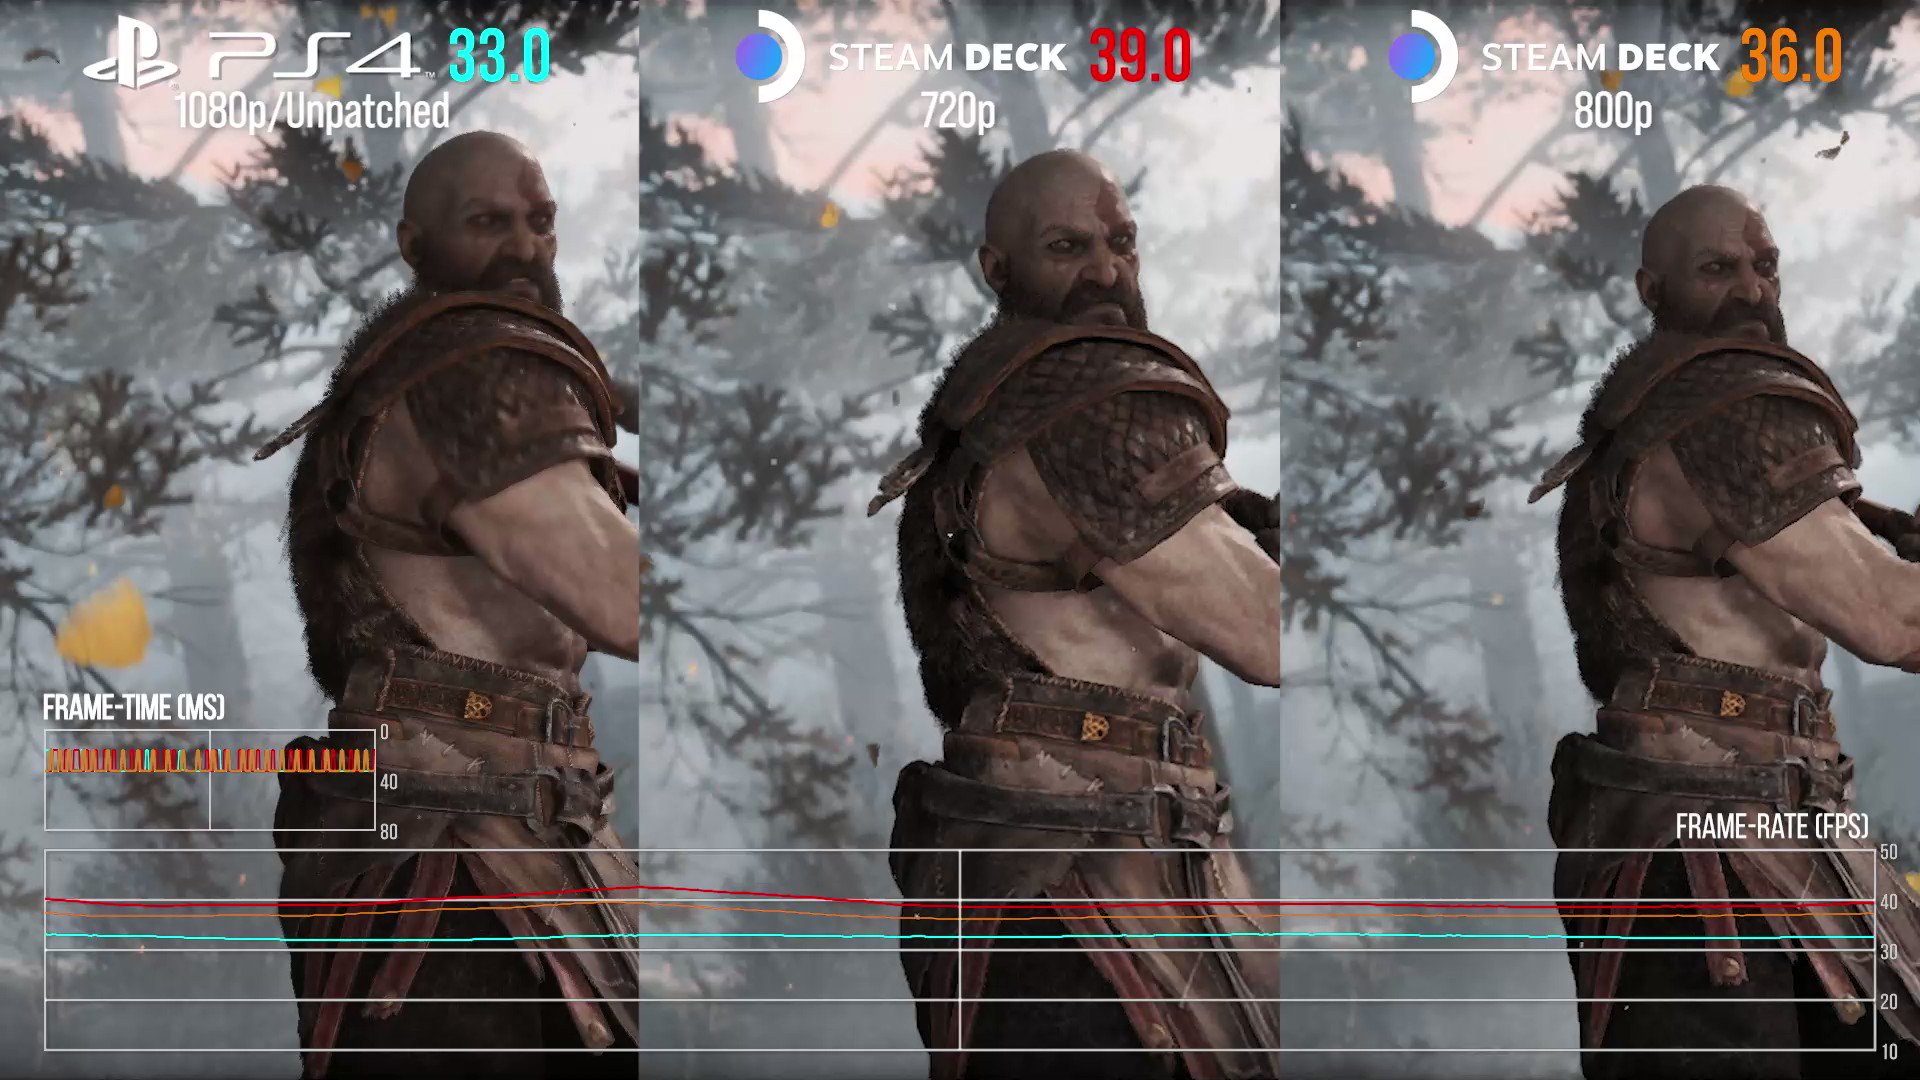 Mejeriprodukter Creed boom Digital Foundry on Twitter: "Saturday (again): All of the God of War PS4 vs  Steam Deck assets generated for the review were shared with supporters  (Premium/Retro supporters). https://t.co/ntuxGDNP7m" / Twitter